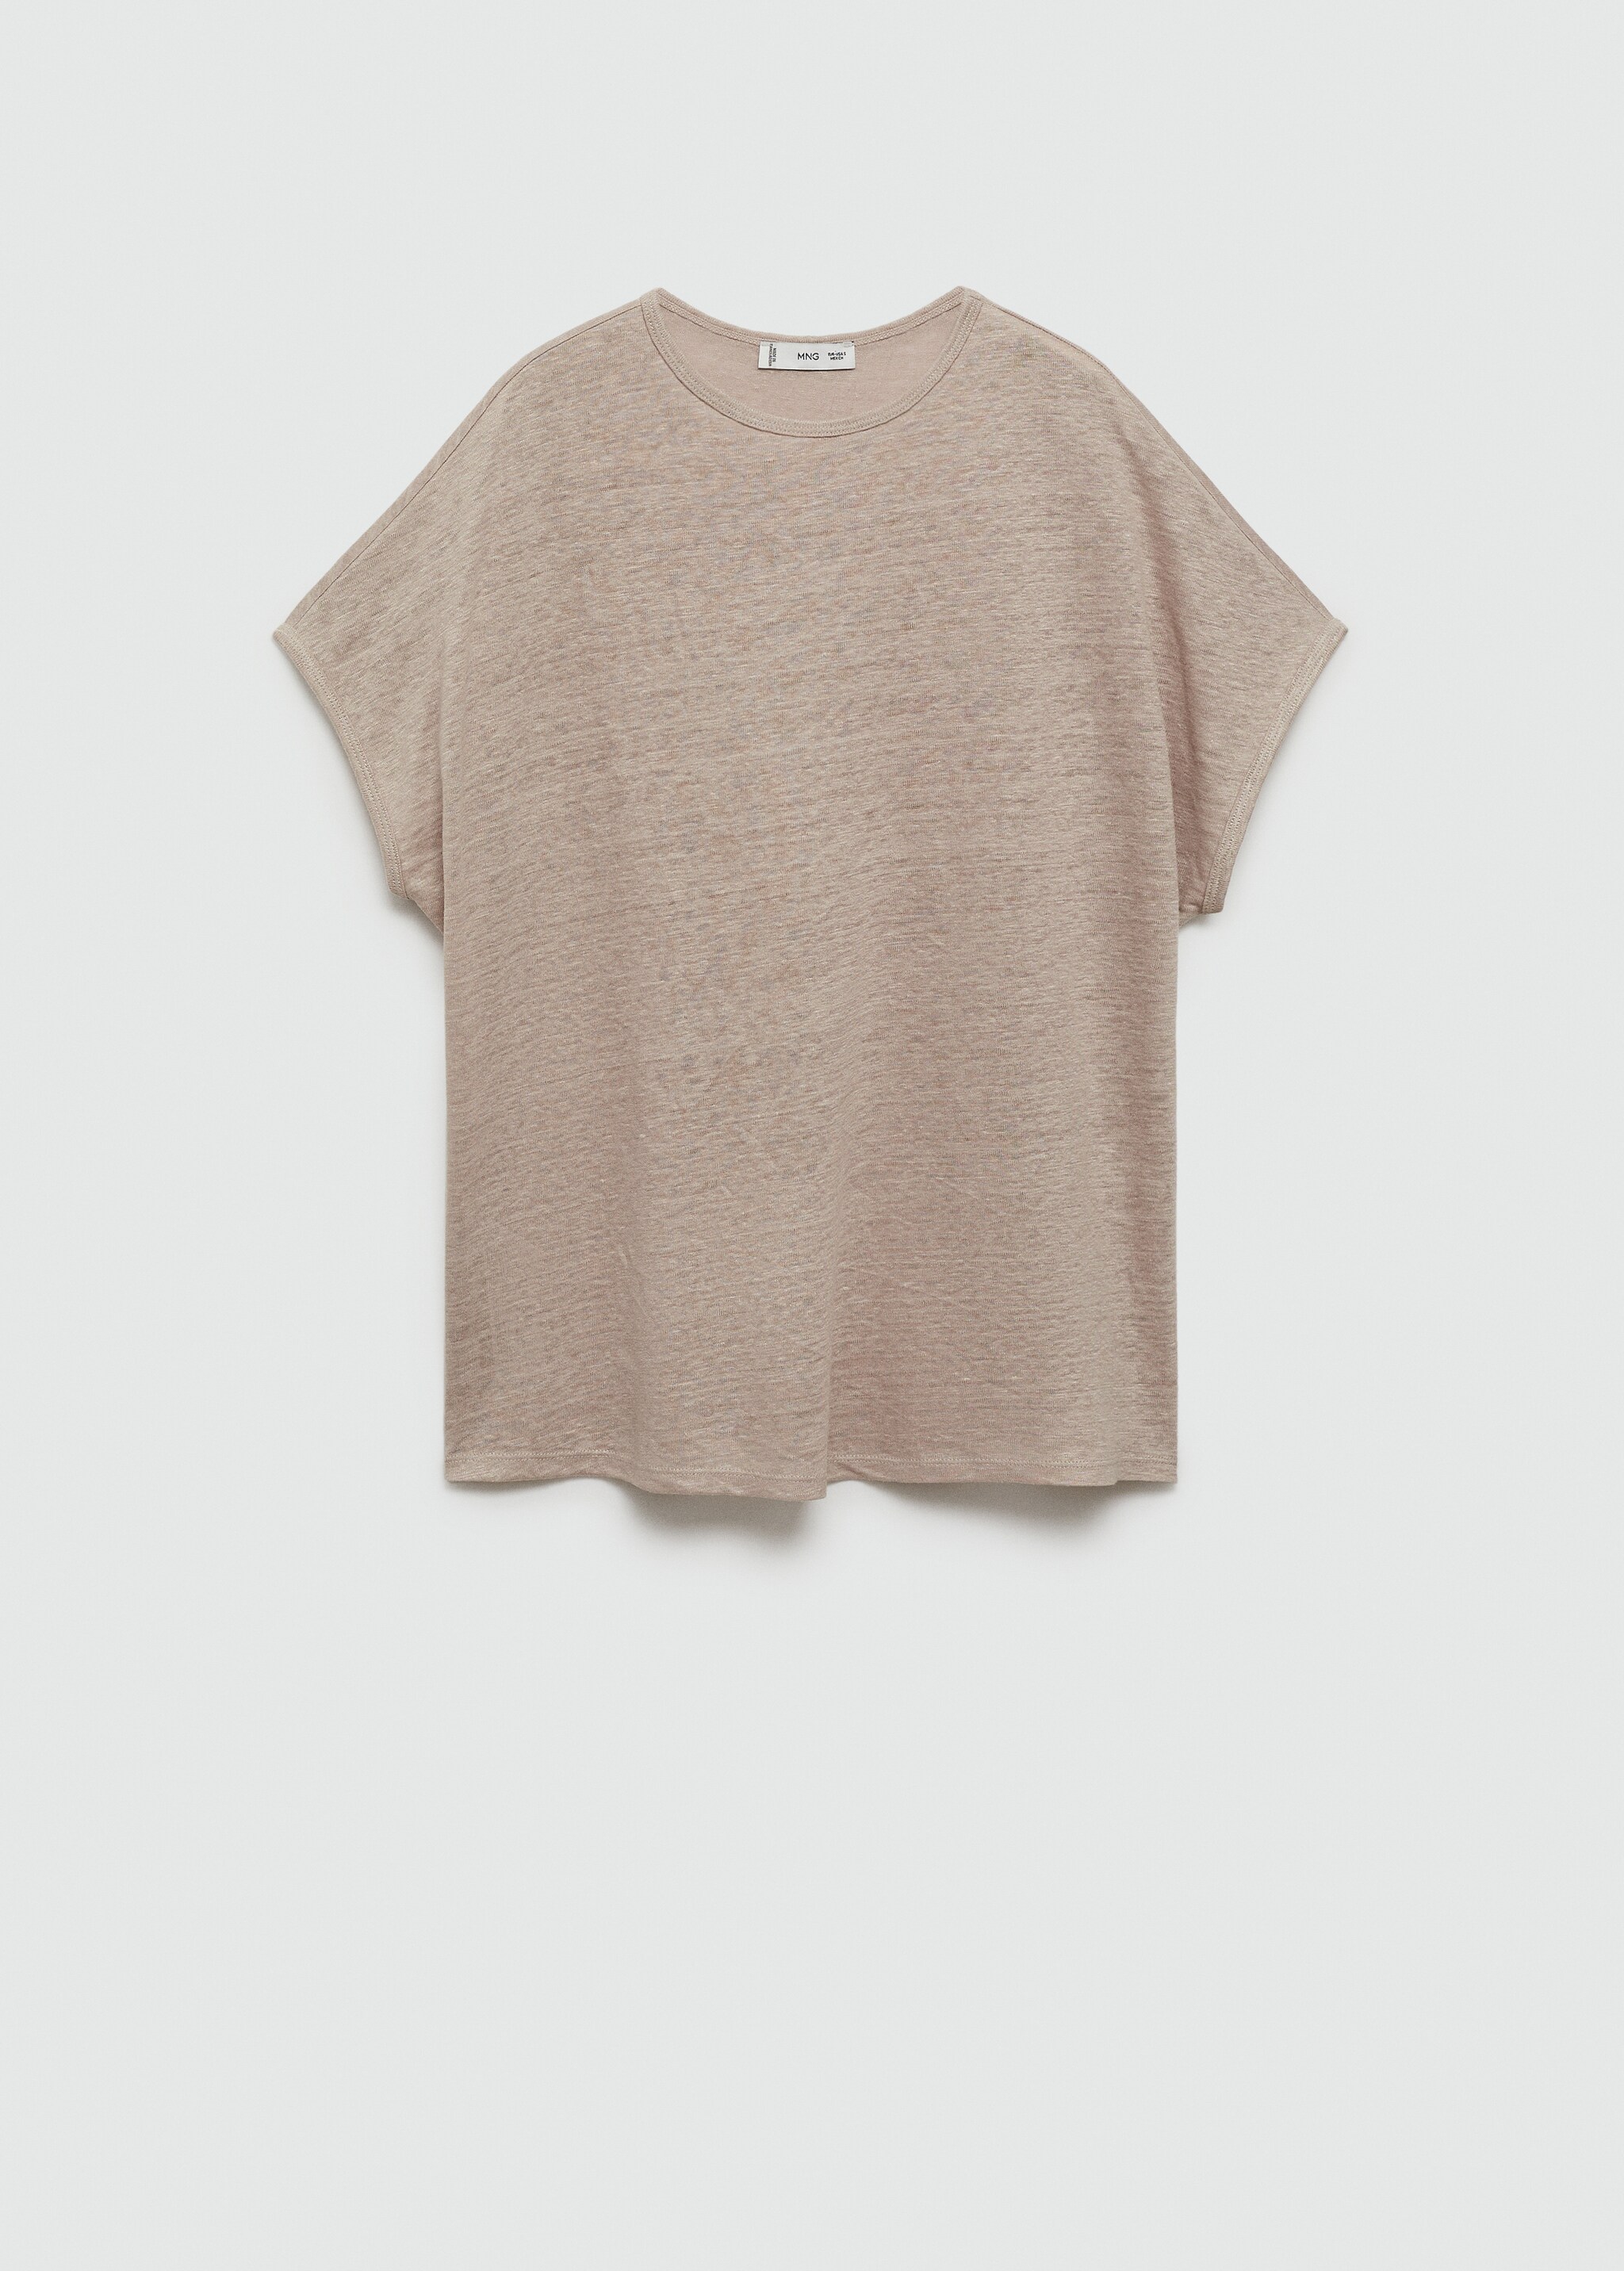 Short-sleeved linen t-shirt - Article without model